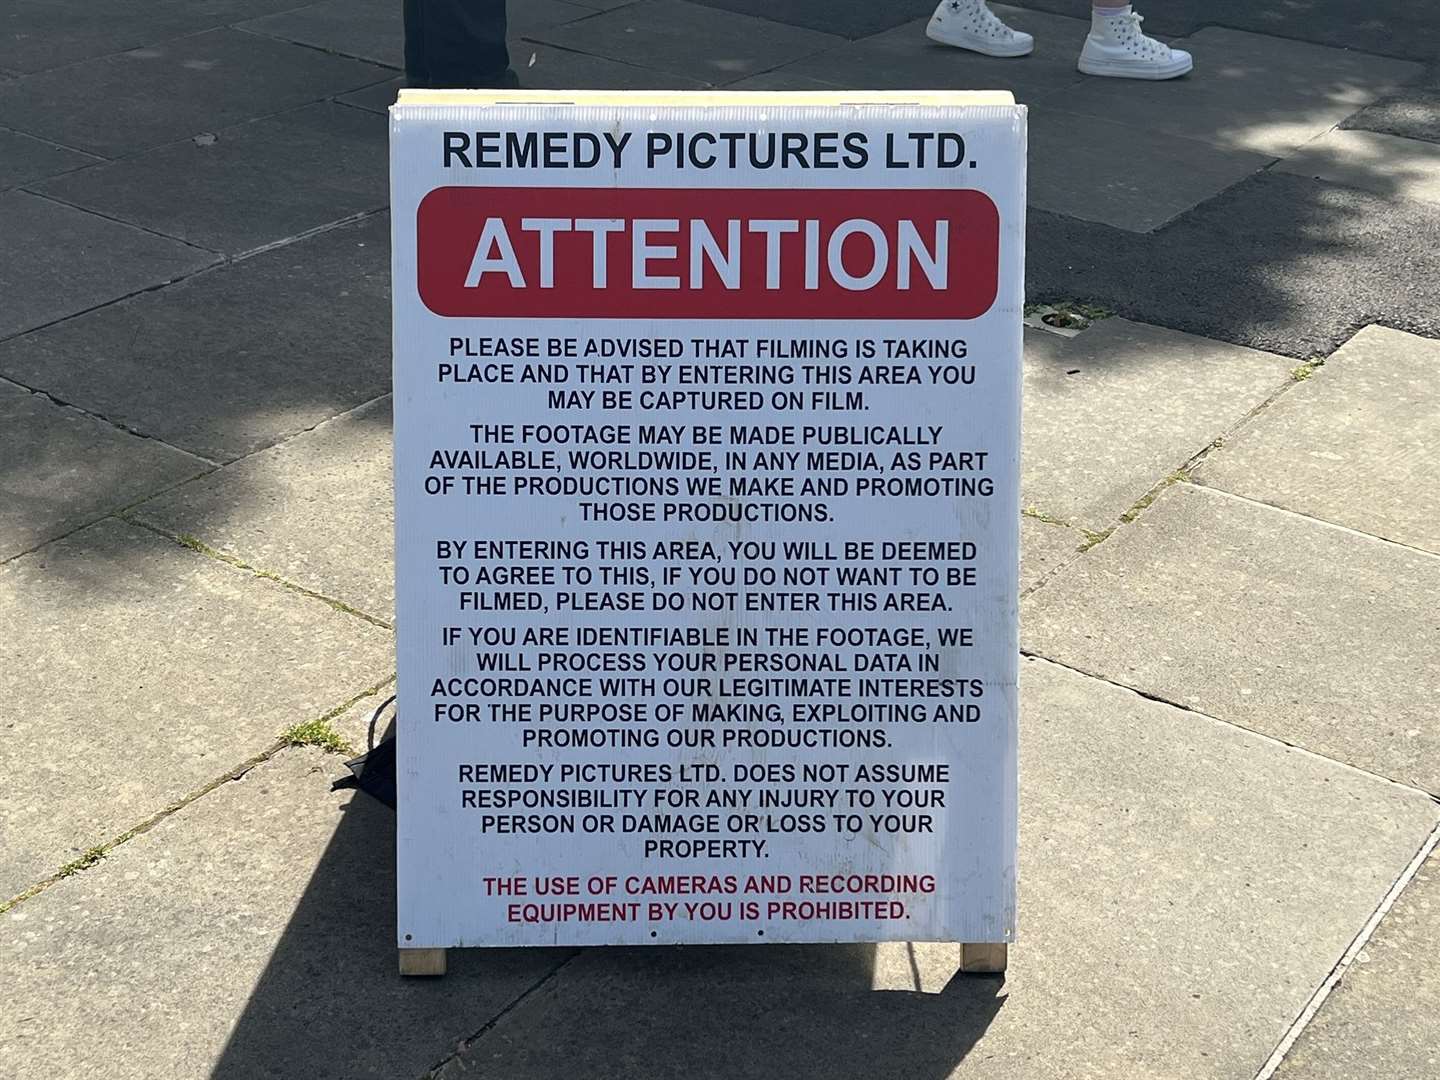 Remedy Pictures LTD have warned the public that if they walk through the filming area they could be captured on camera